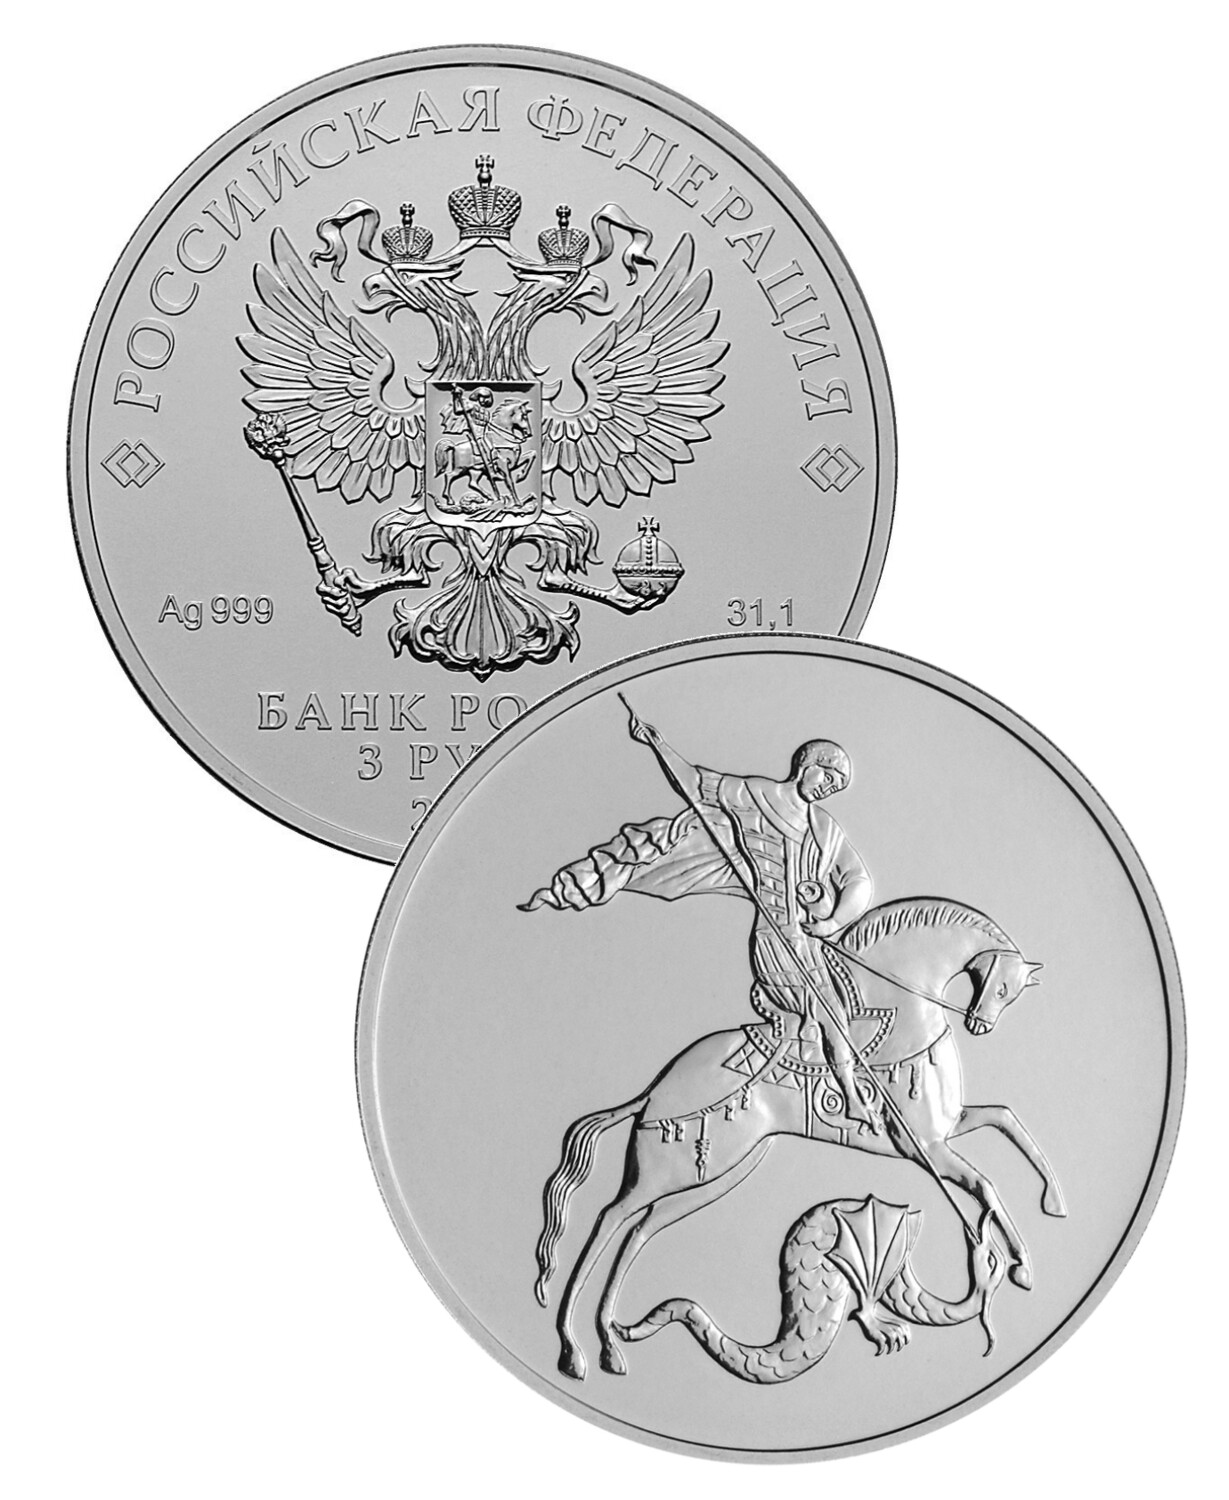 Russia. 2018. 3 Rubles. SPMD. George the Victorious. Silver 999. 1.0 Oz ASW 31.5 g. UNC Mintage: 150,000